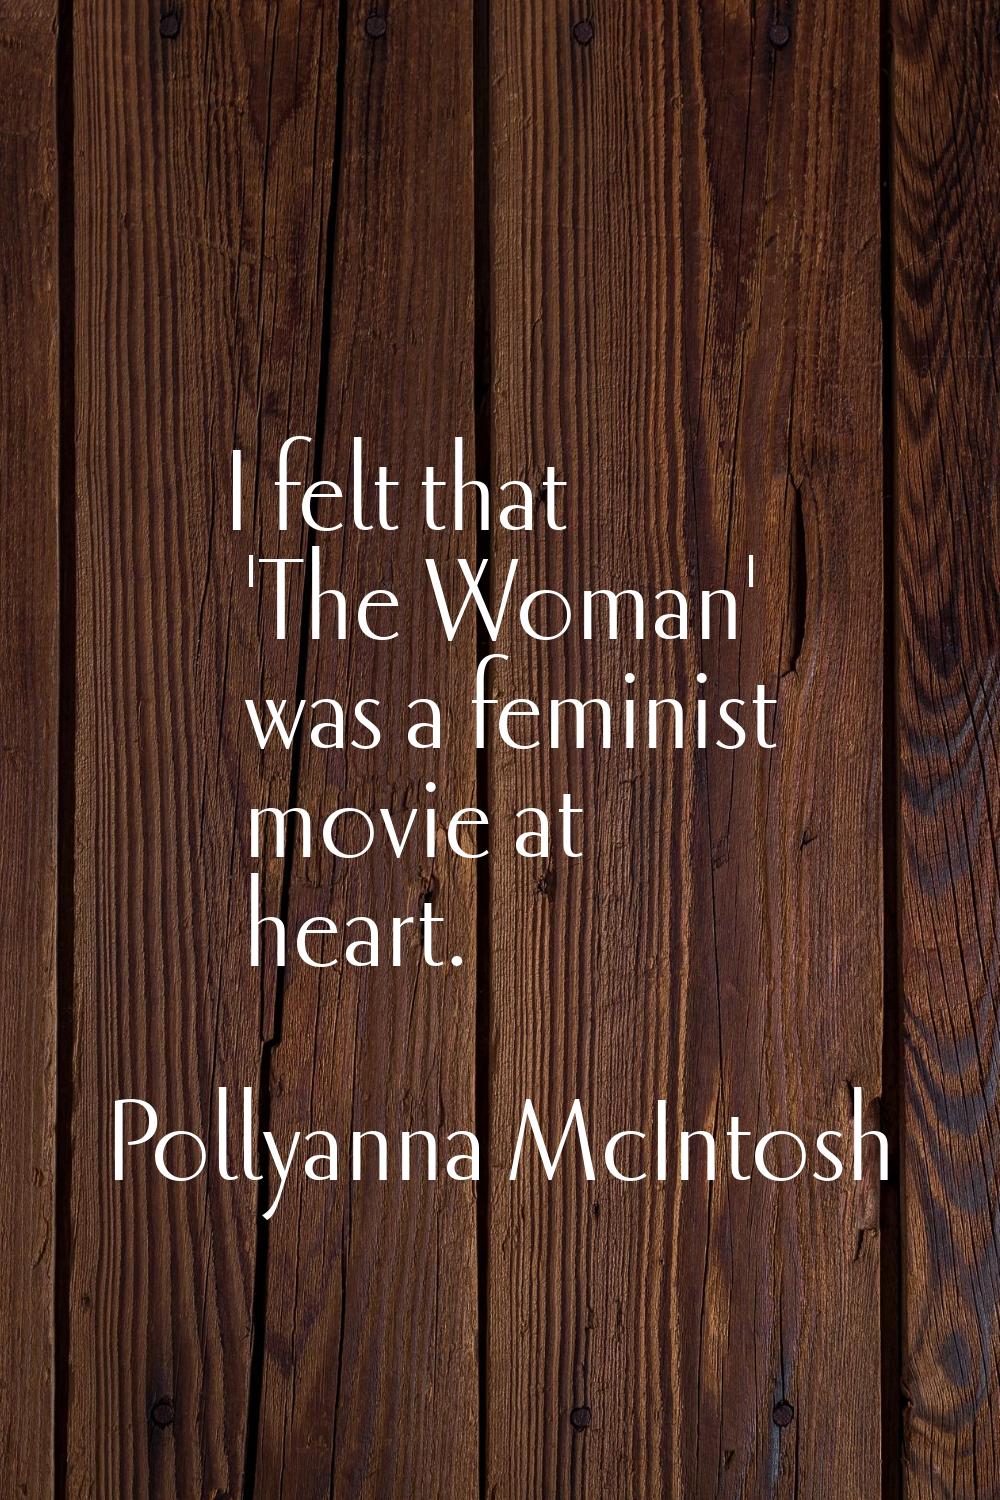 I felt that 'The Woman' was a feminist movie at heart.